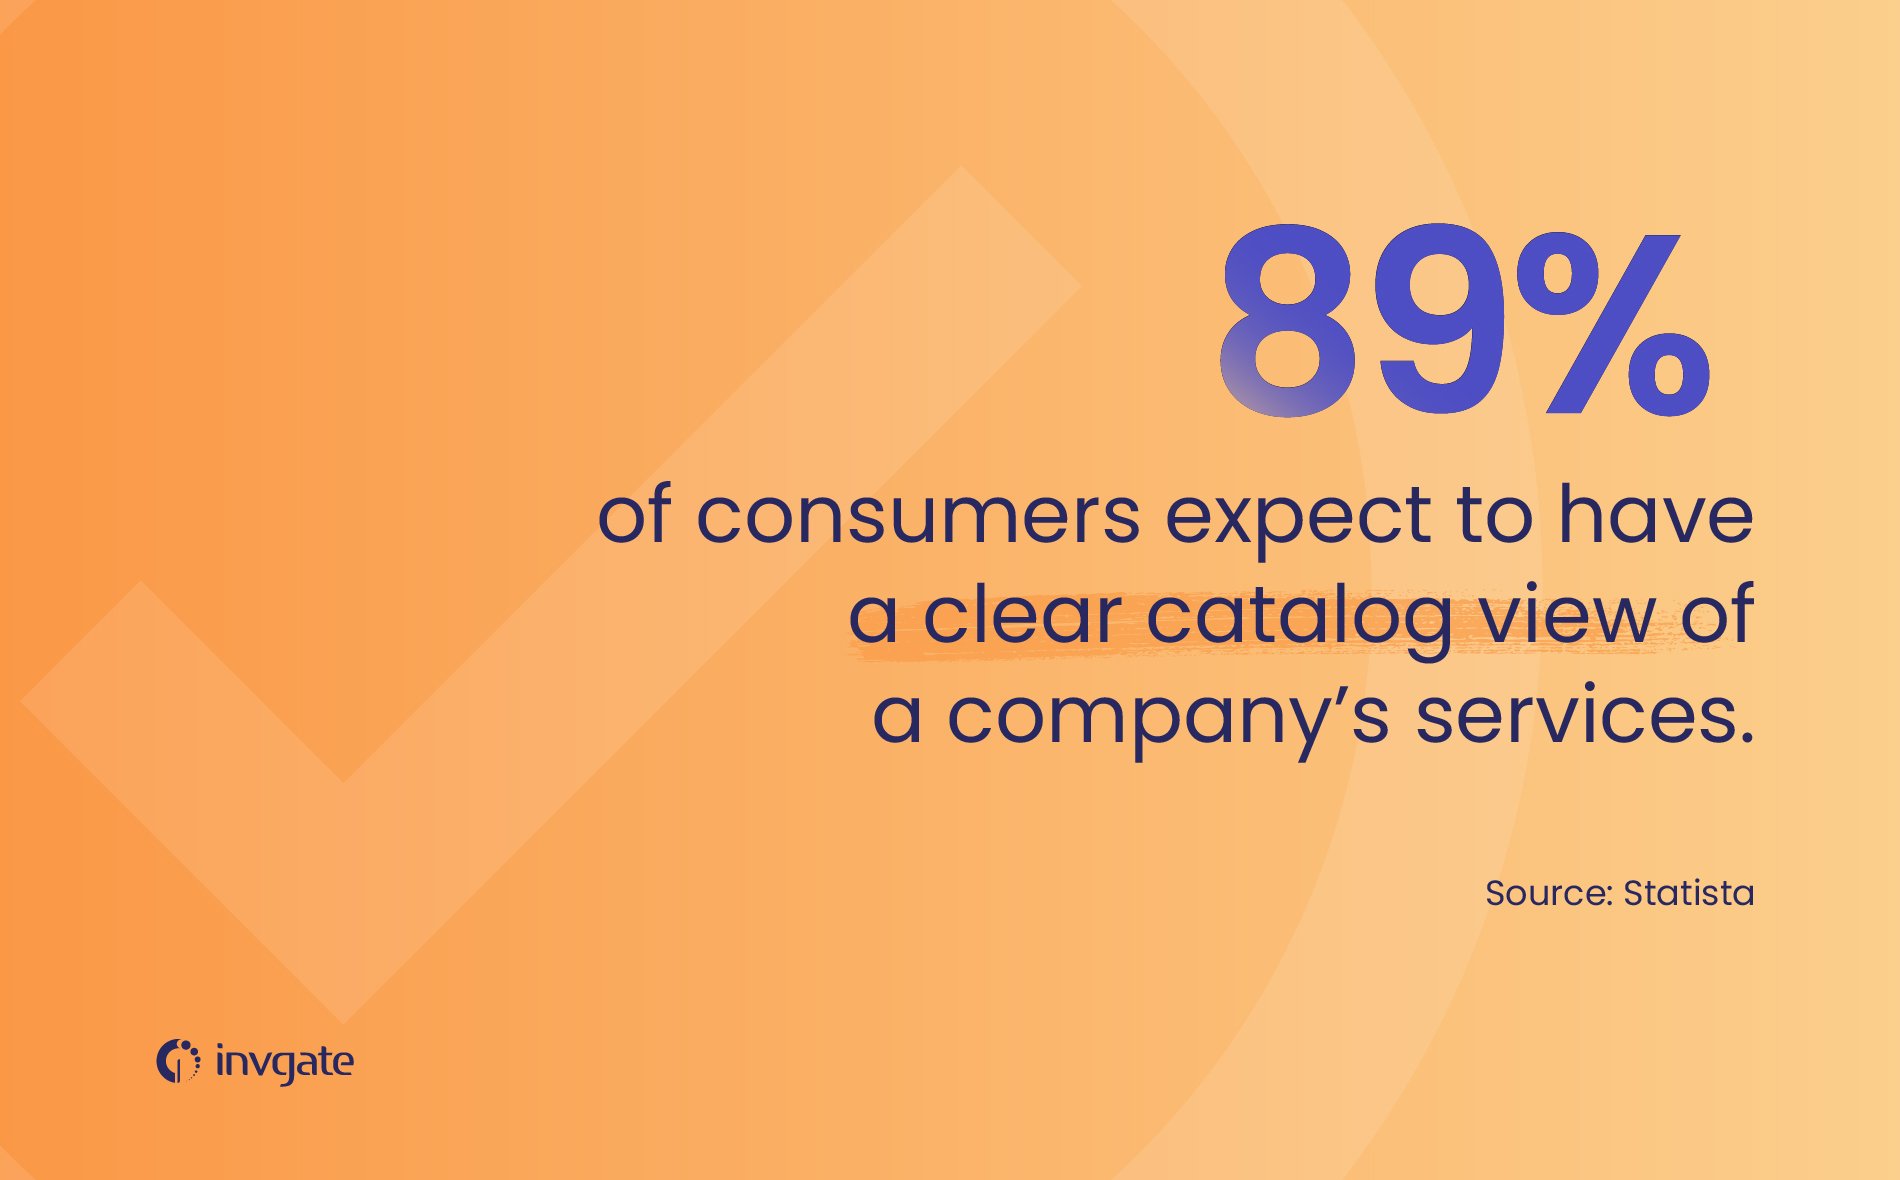 Customers expect a clear catalog view